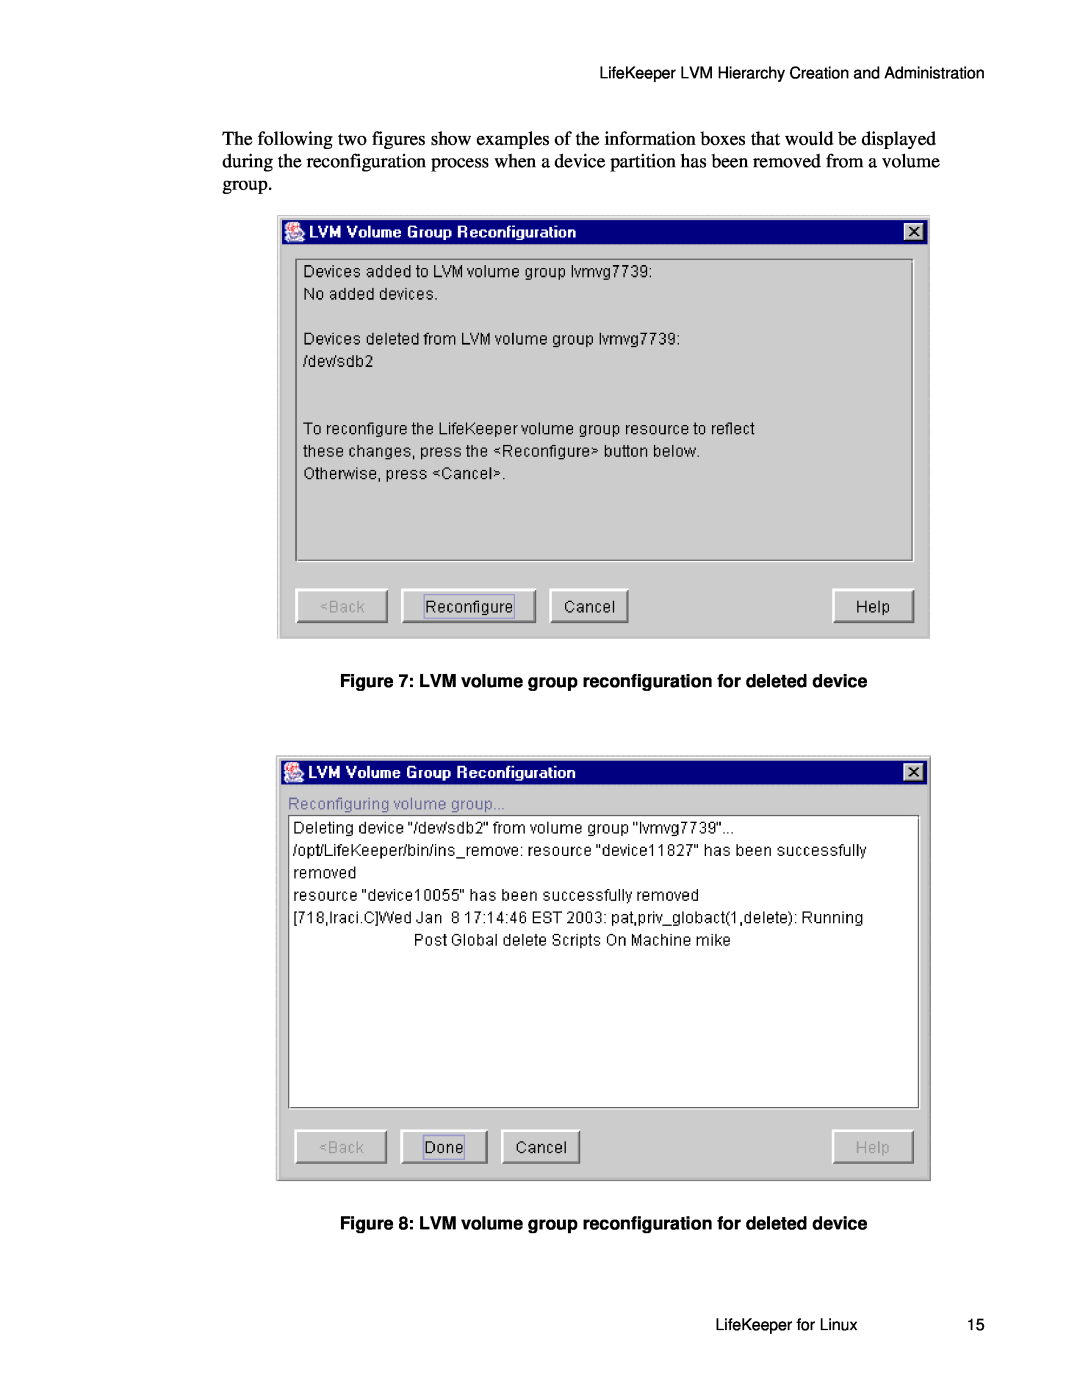 SteelEye 4.5.0 manual LVM volume group reconfiguration for deleted device 